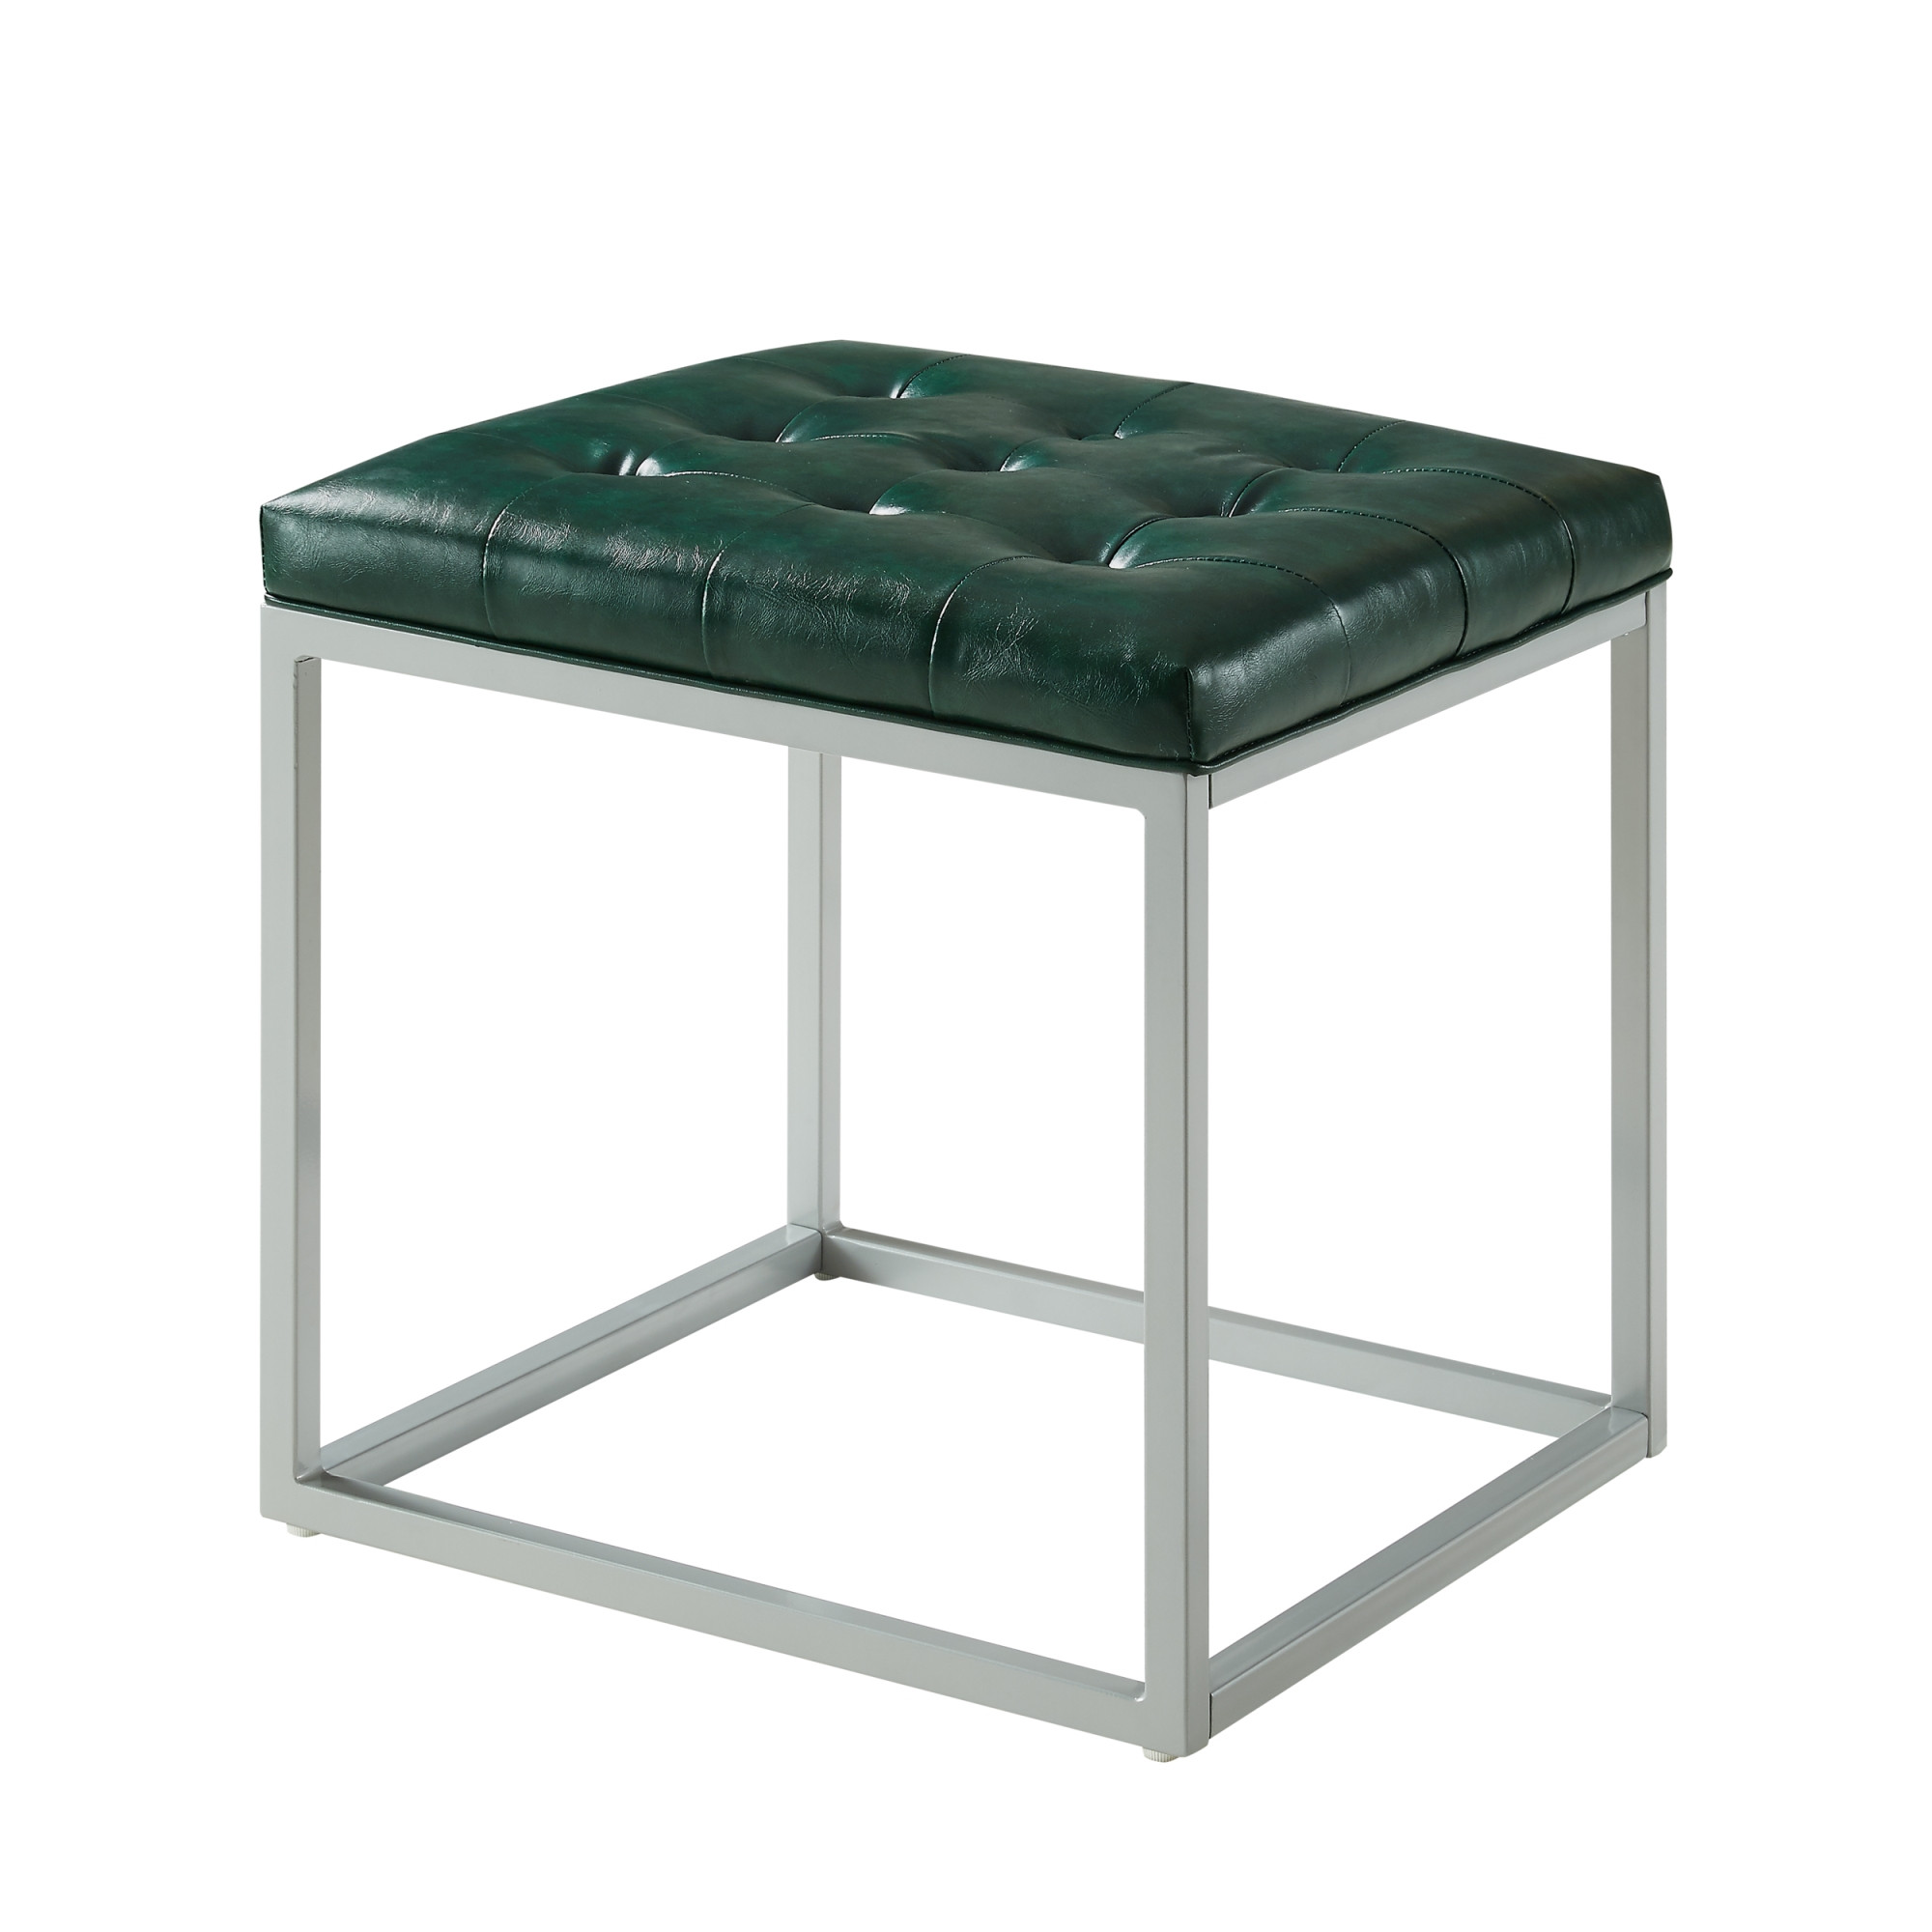 18" Green Faux Leather And Gray Cube Ottoman-487772-1